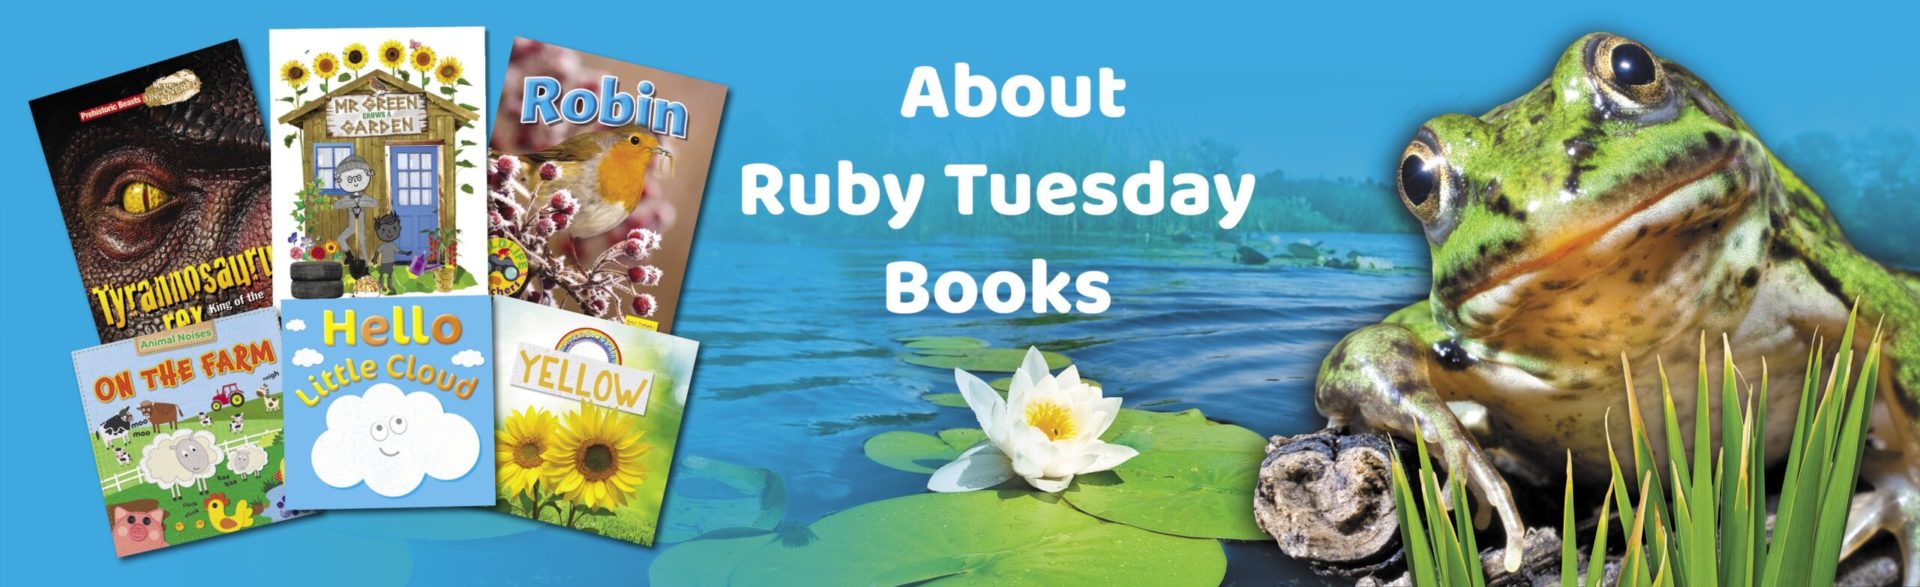 International Rights - About Ruby Tuesday Books